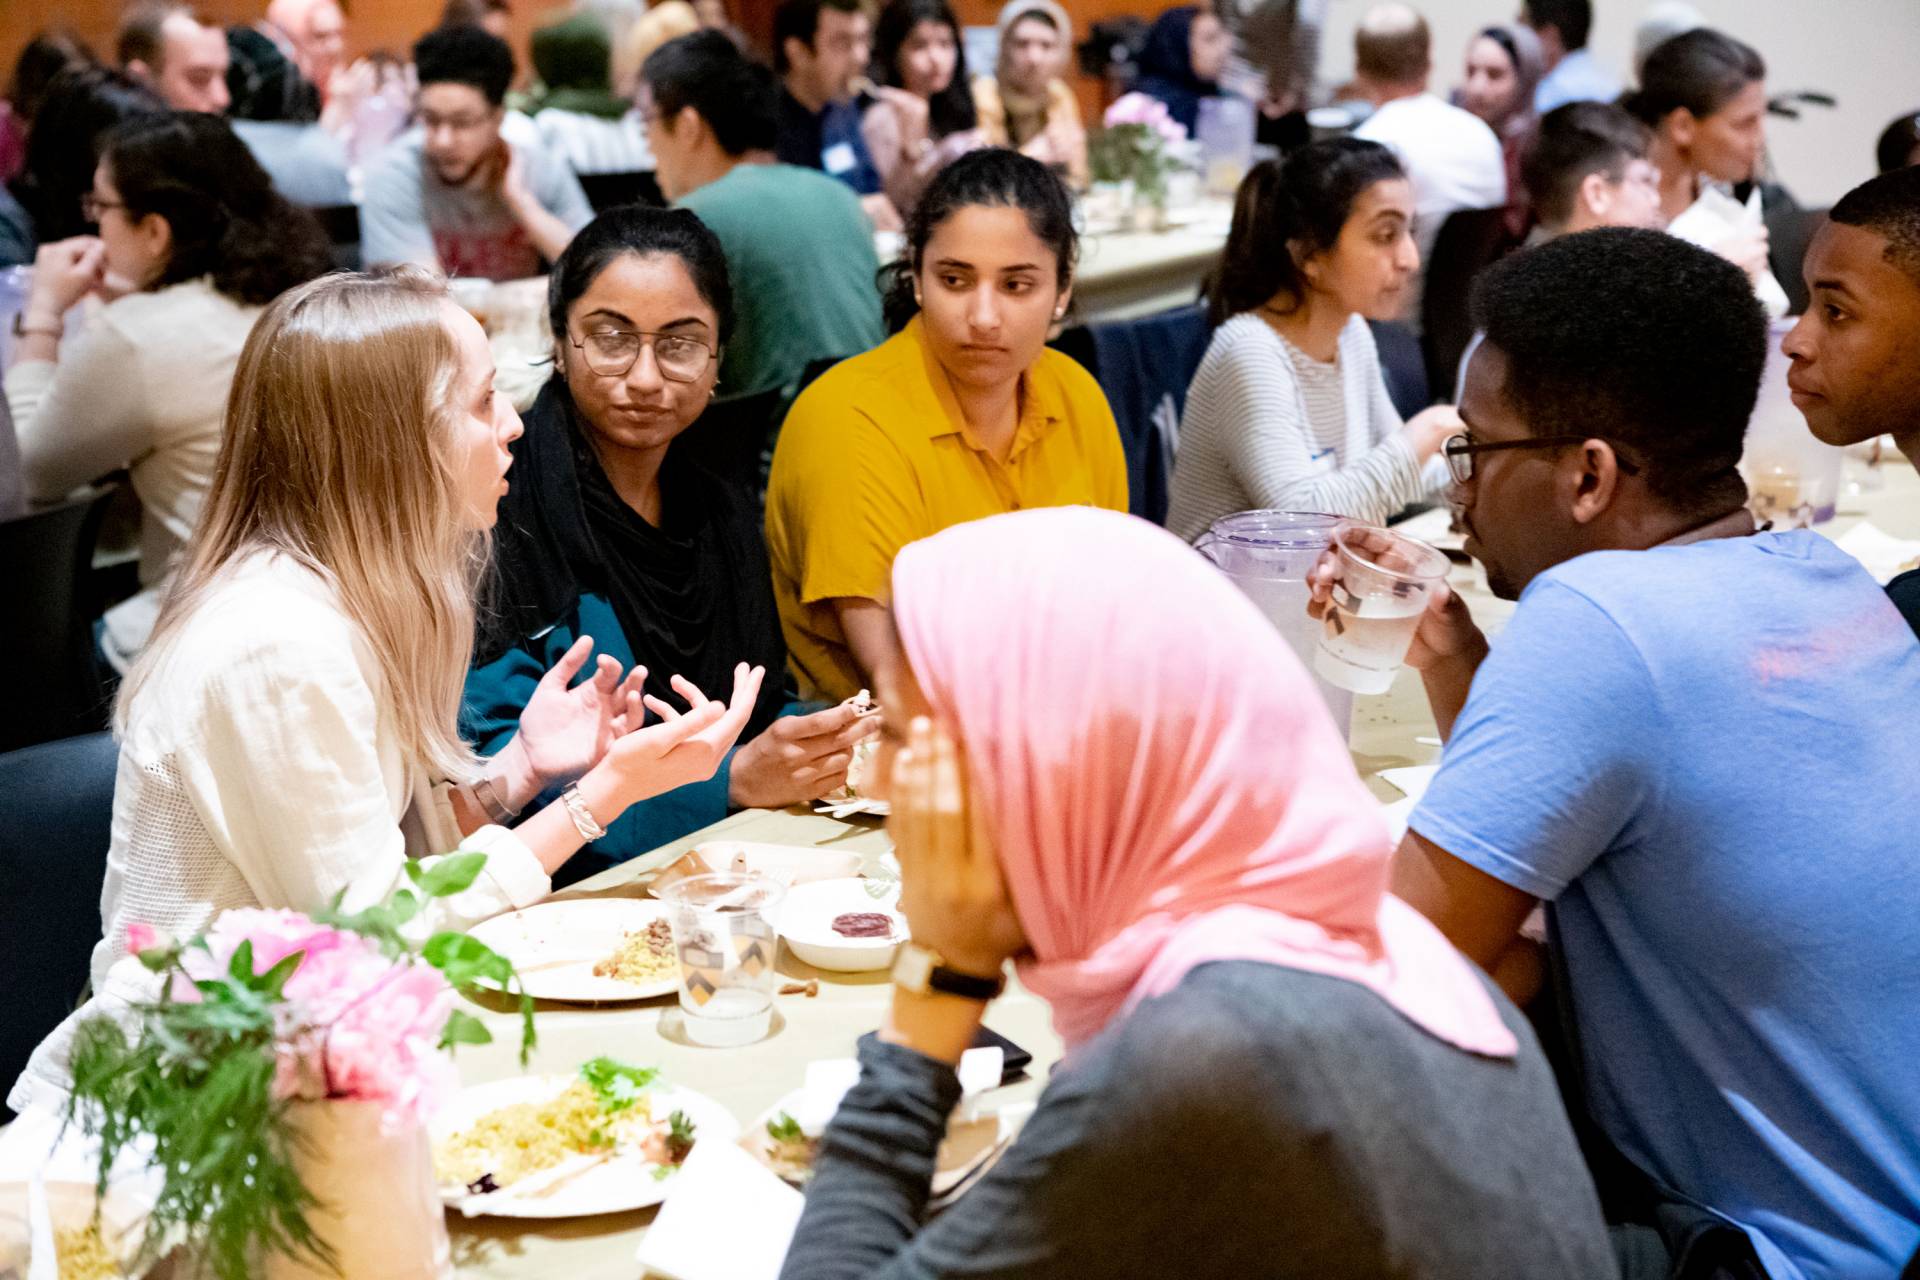 Students eating and speaking with one another at the interfaith dinner